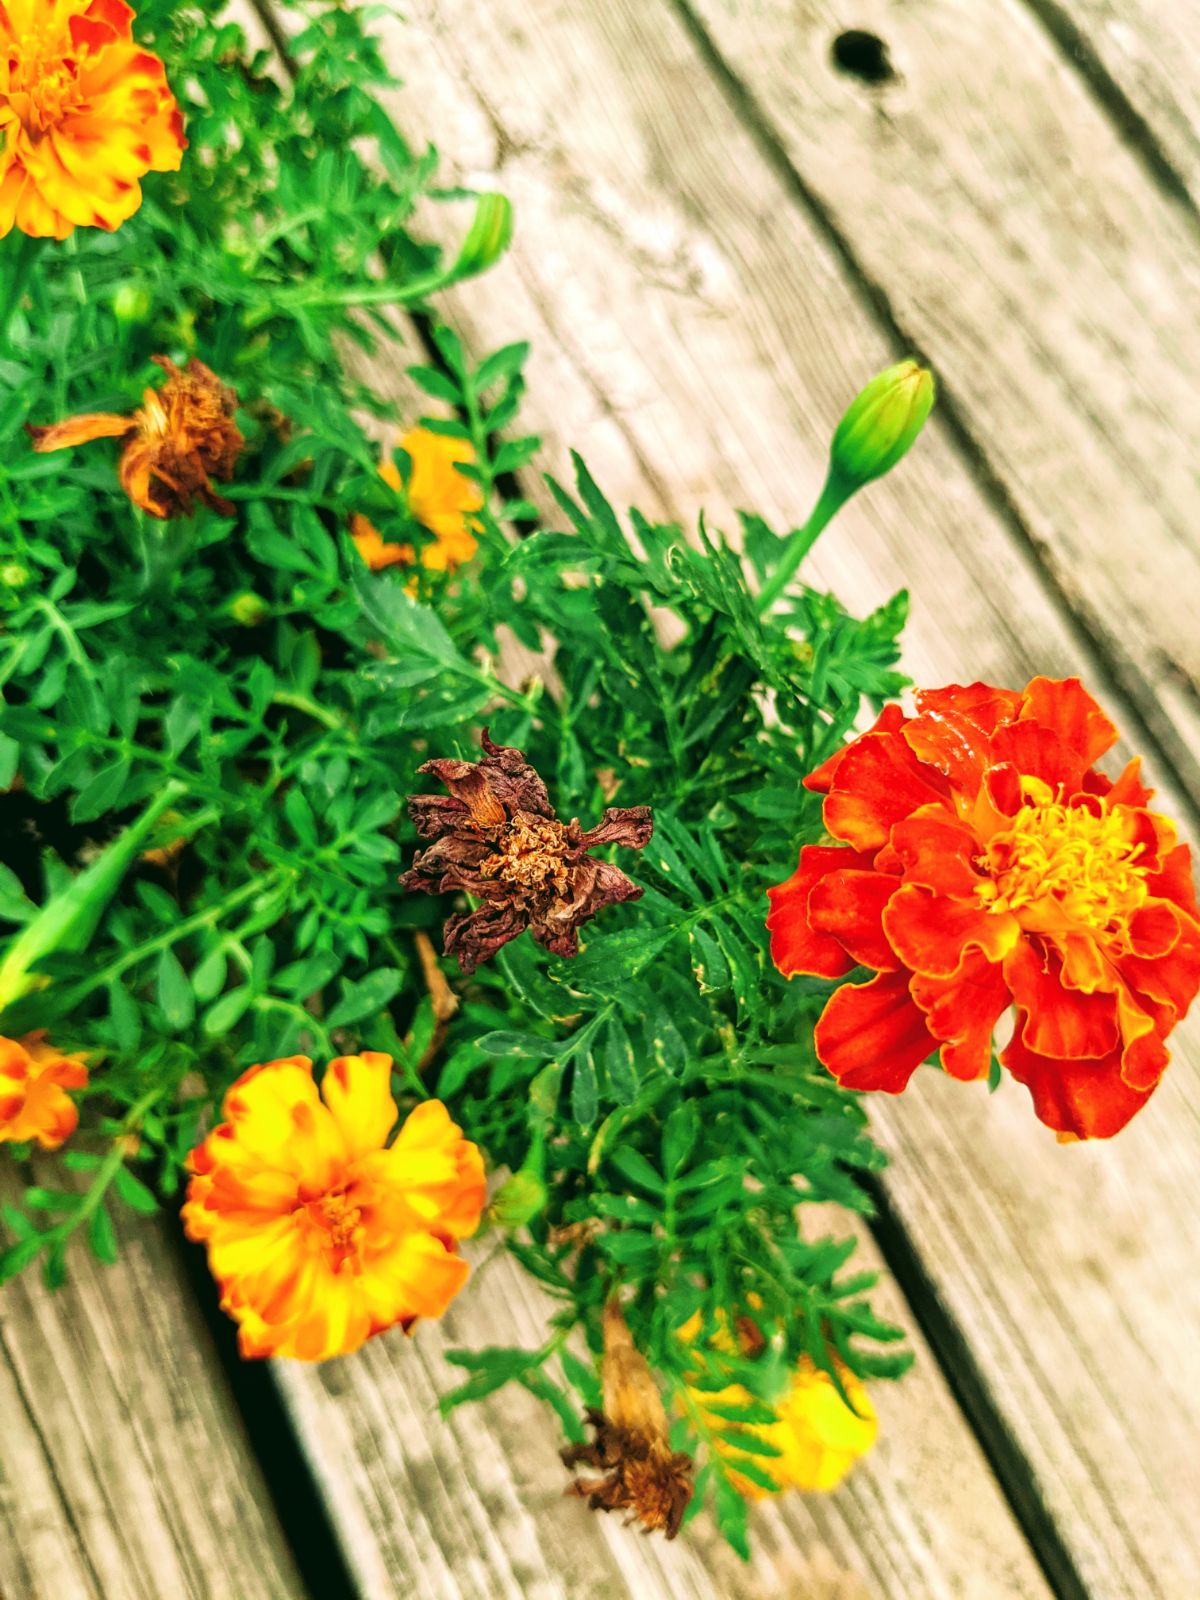 Colorful marigolds with spent blooms